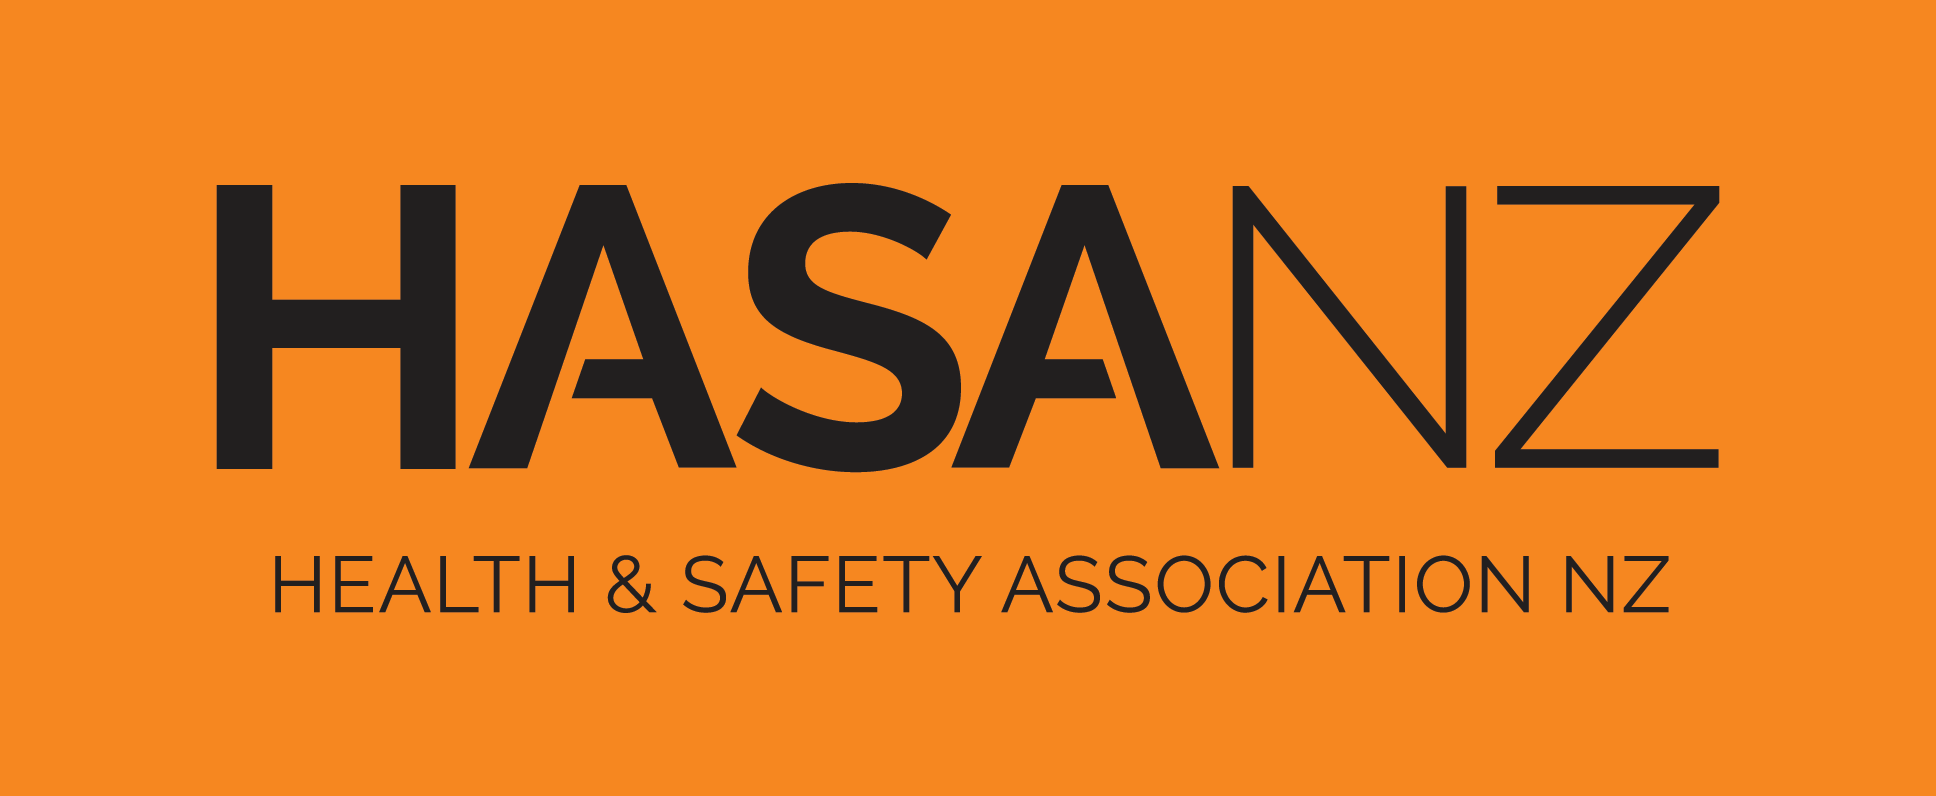 Health and Safety Association of New Zealand (HASANZ)